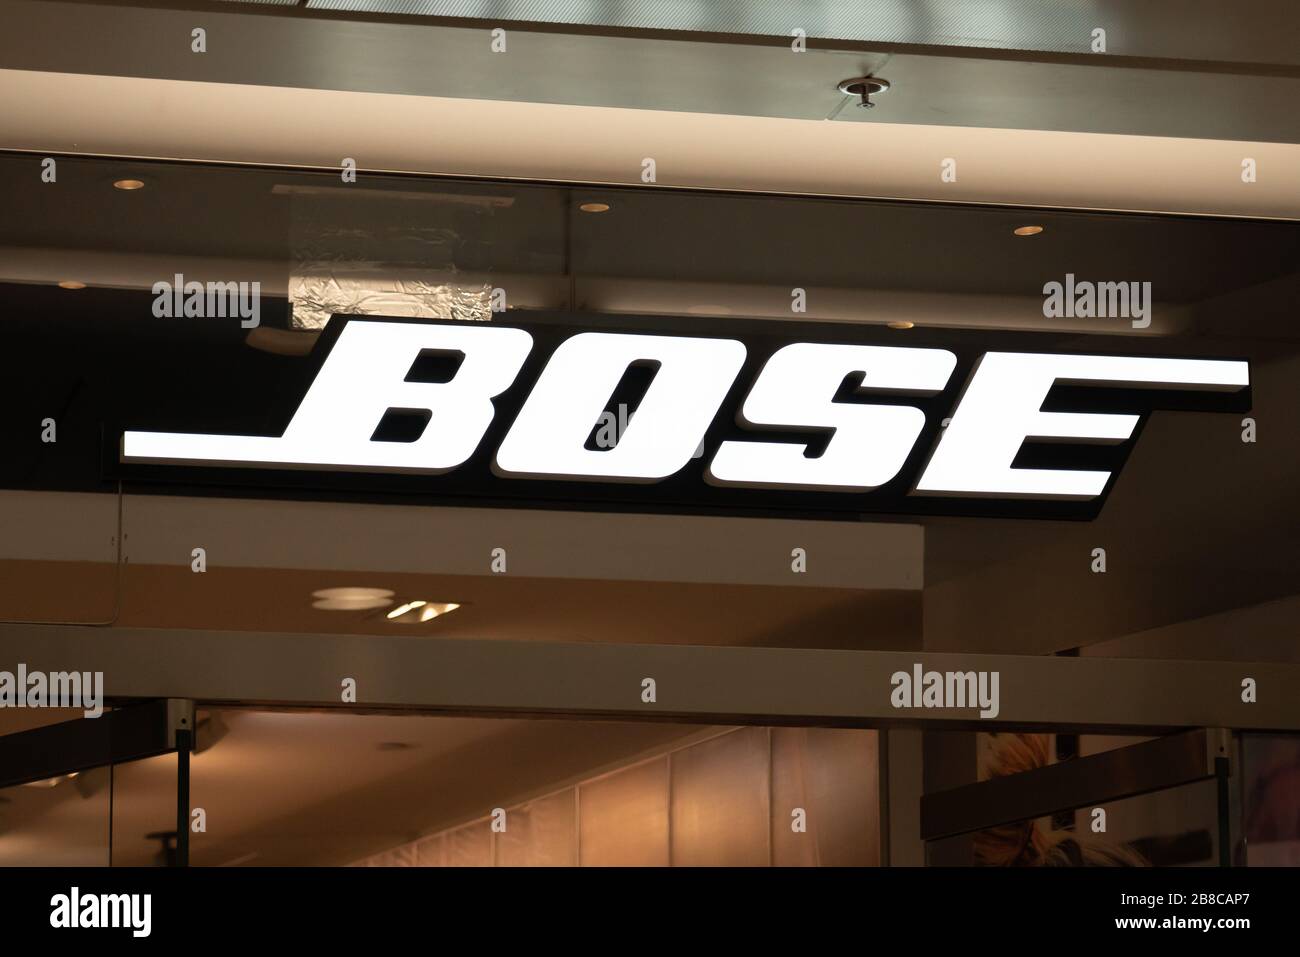 Bose corporation logo stock and images - Alamy